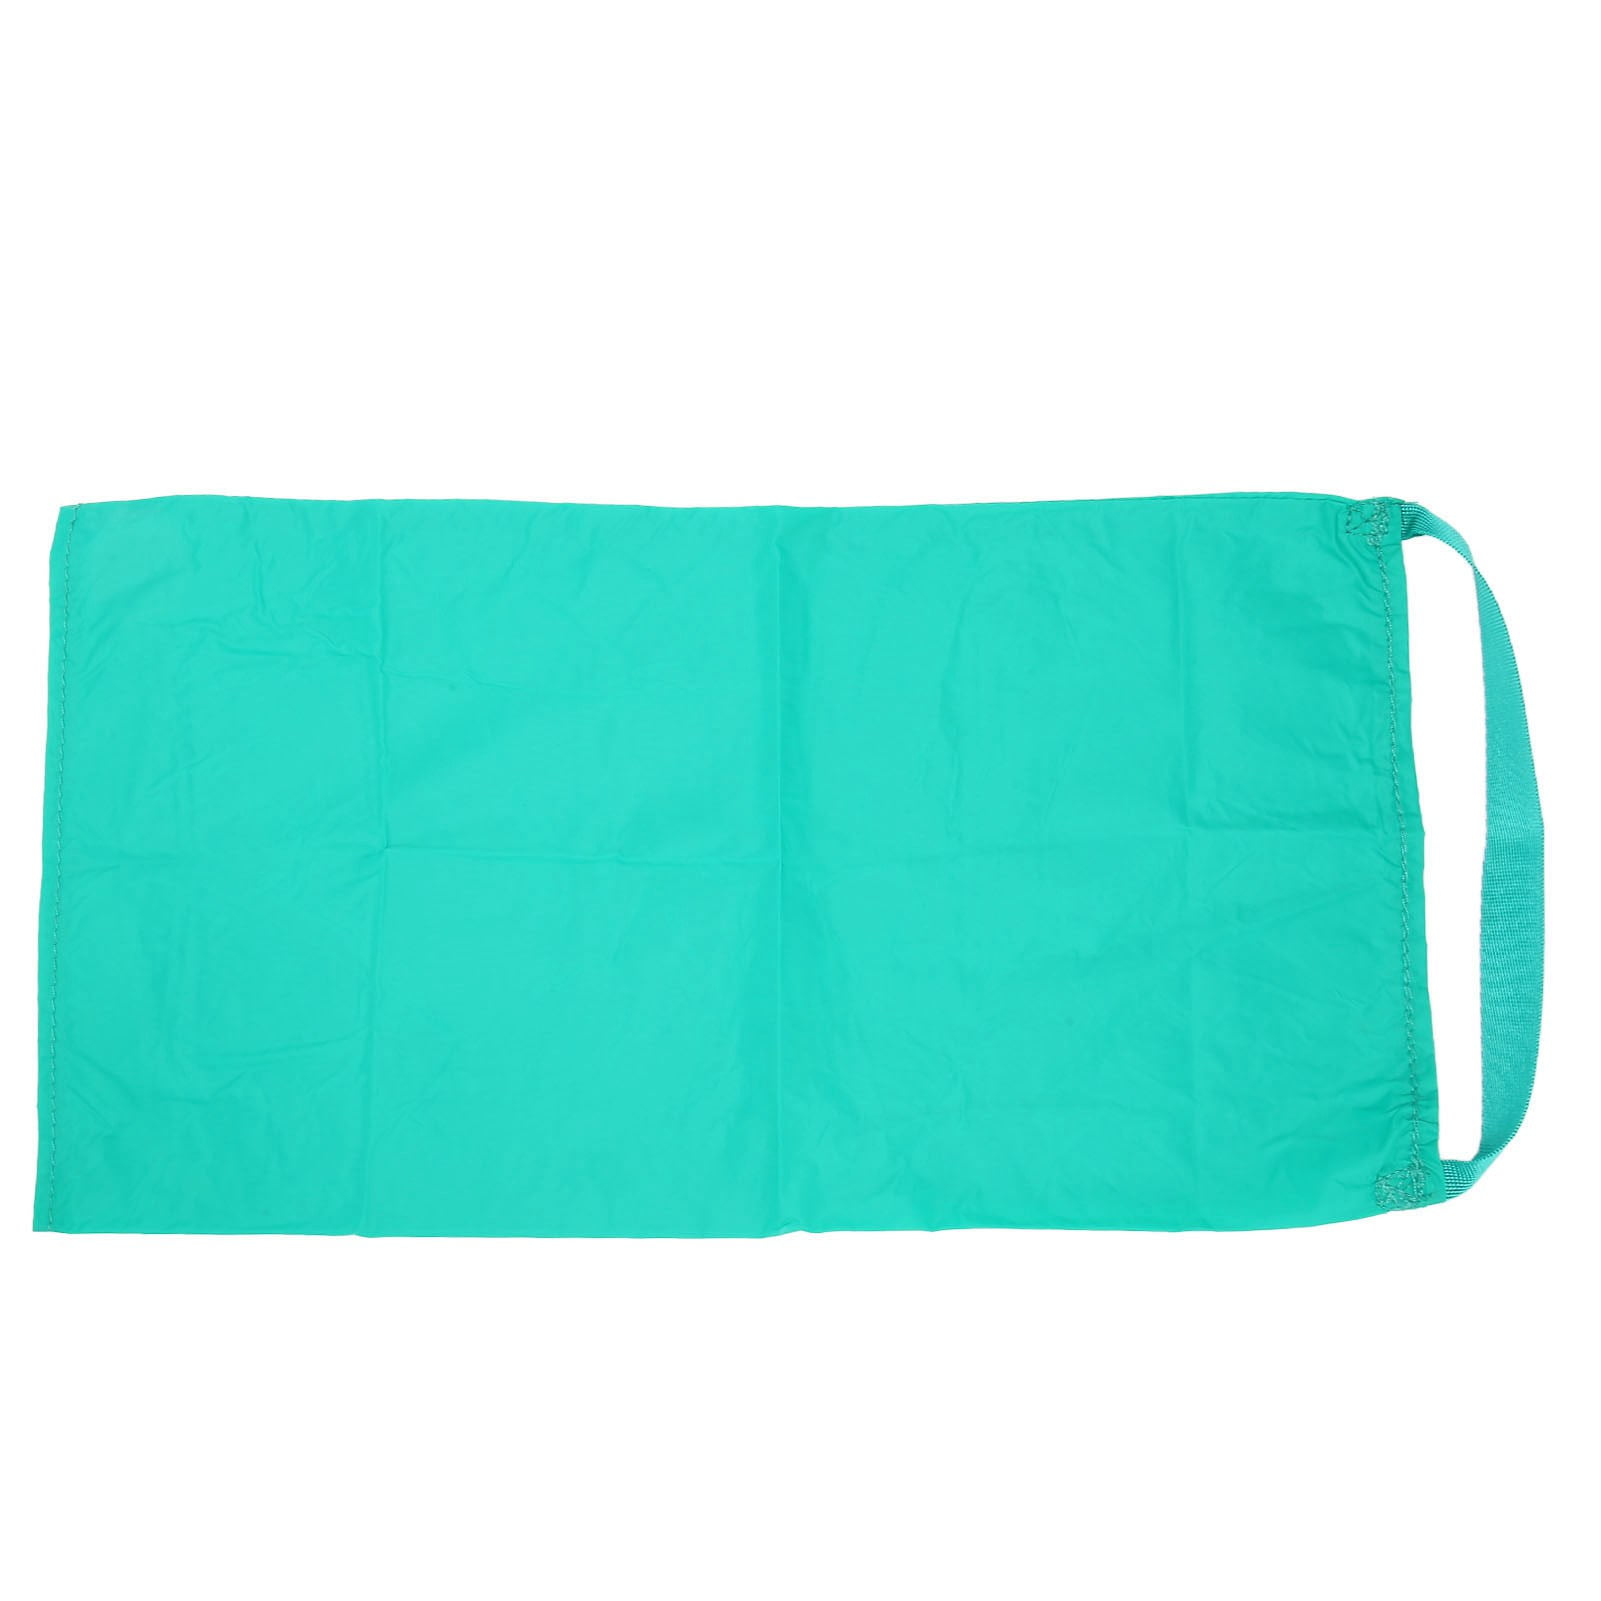 Patient Dressing Aid Slide Sheet Cover Reduce Friction Waterproof ...